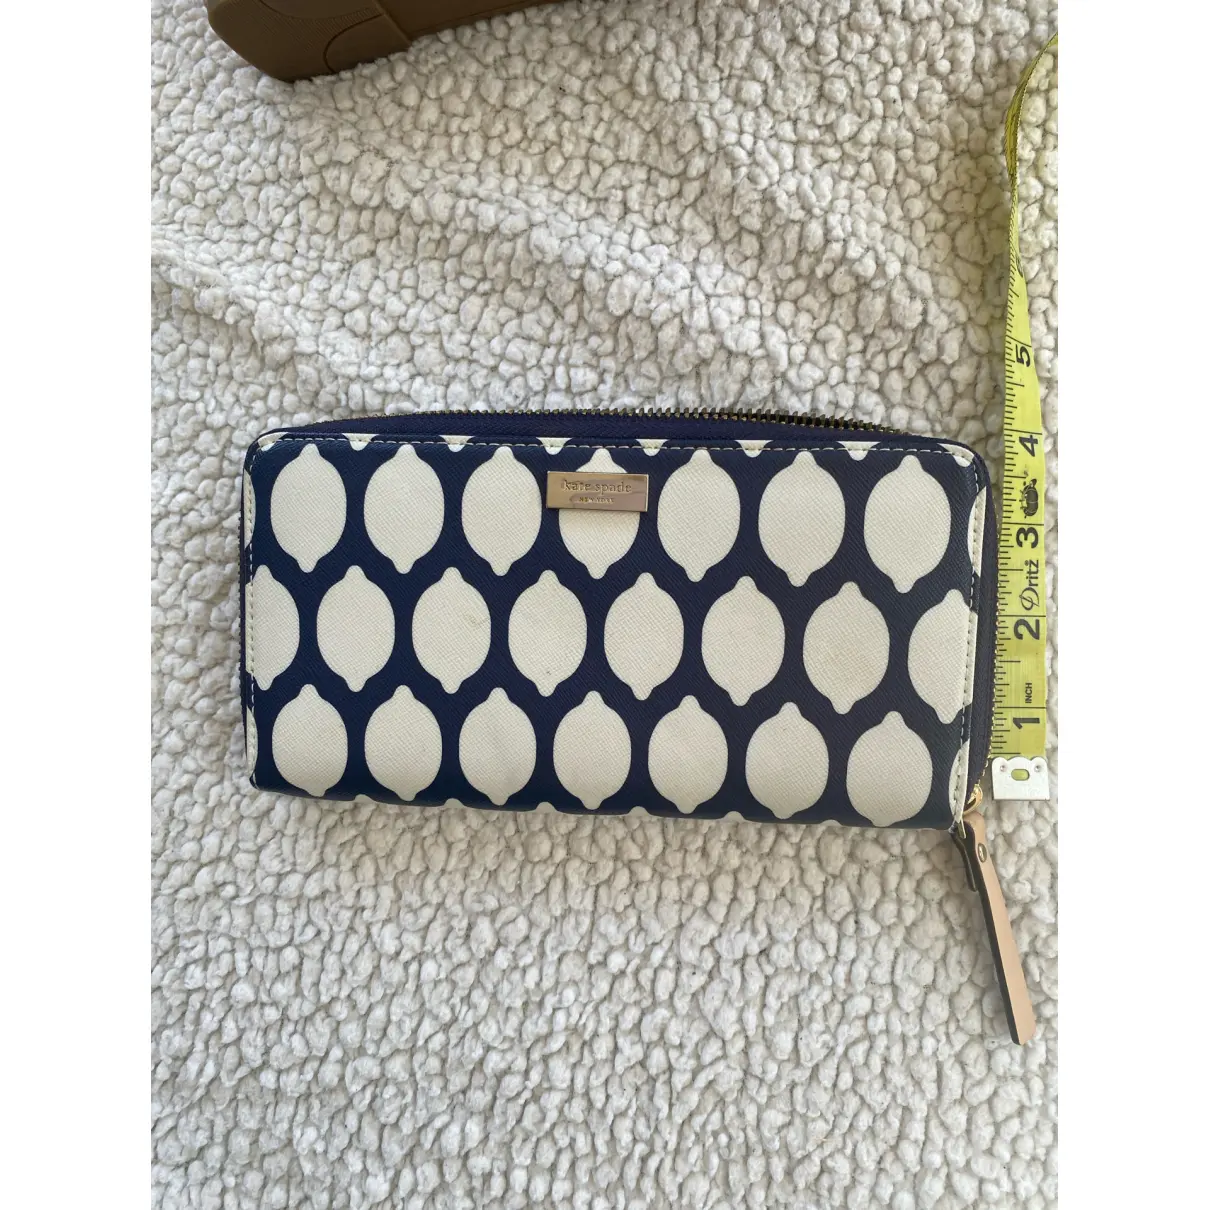 Patent leather clutch bag Kate Spade